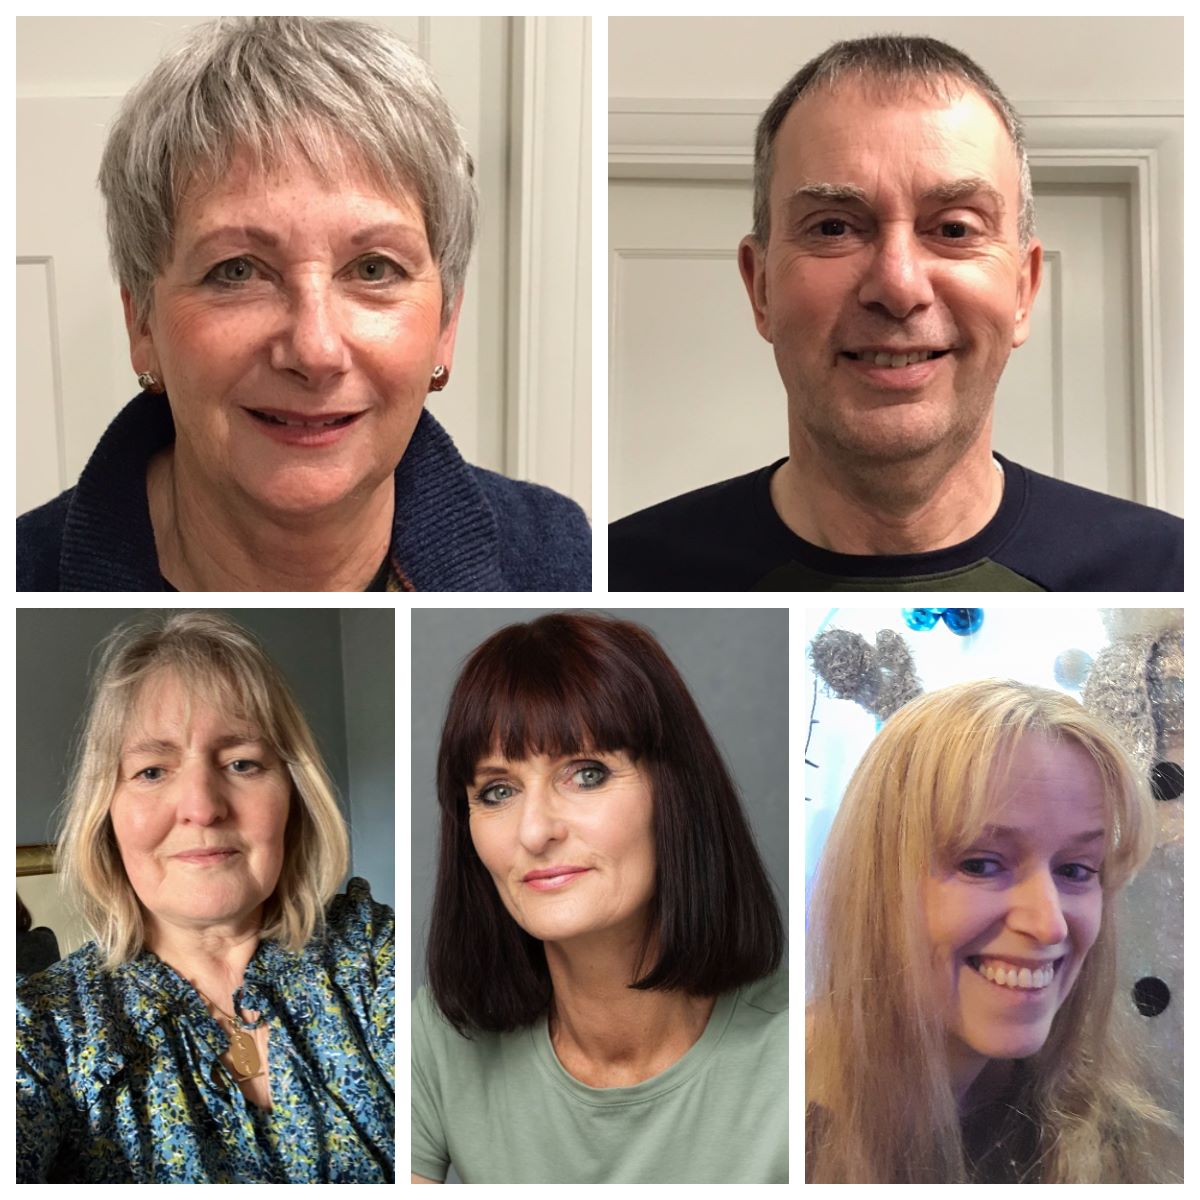 🚨 Announcement 🚨 As the official SPOKESperson for Discover Buxton, I am happy to say we have five new recruits to our team! Find out all about them at discoverbuxton.co.uk/we-have-new-re… ⛱️ #Buxton #DiscoverBuxton #TourGuides #HighPeak #BuxtonBusiness